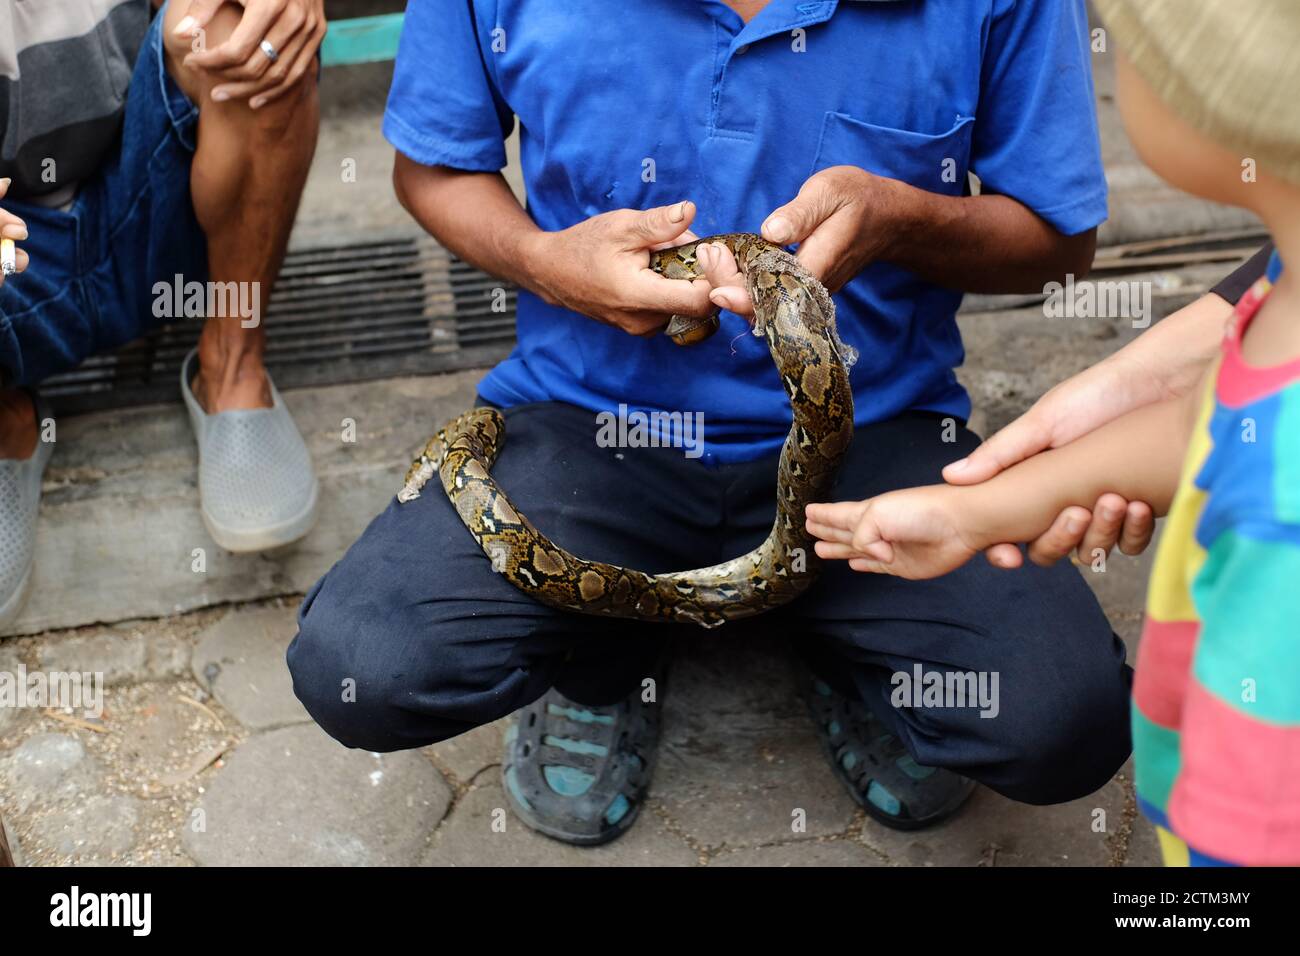 Purbalingga, Indonesia - April 19, 2020: Old man help reticulated snake shedding skin, selective focus on hand. Stock Photo